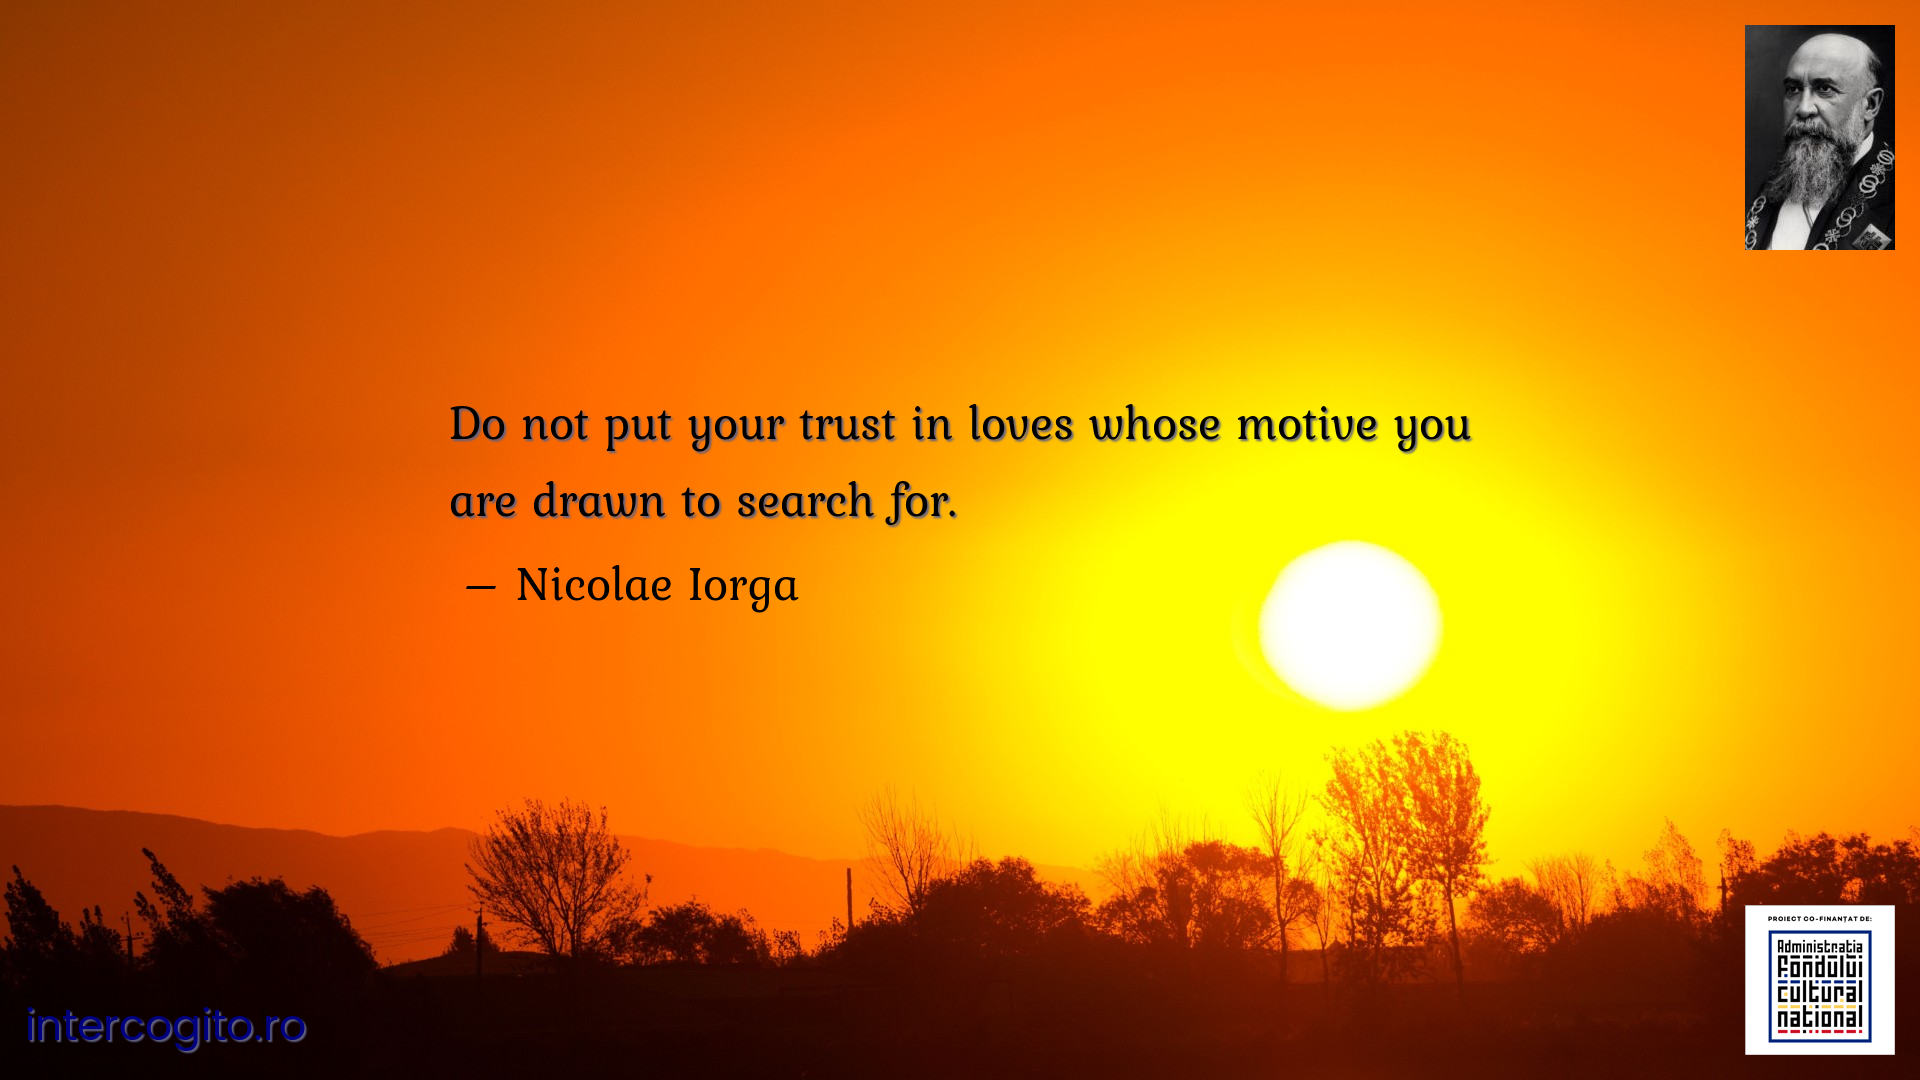 Do not put your trust in loves whose motive you are drawn to search for.